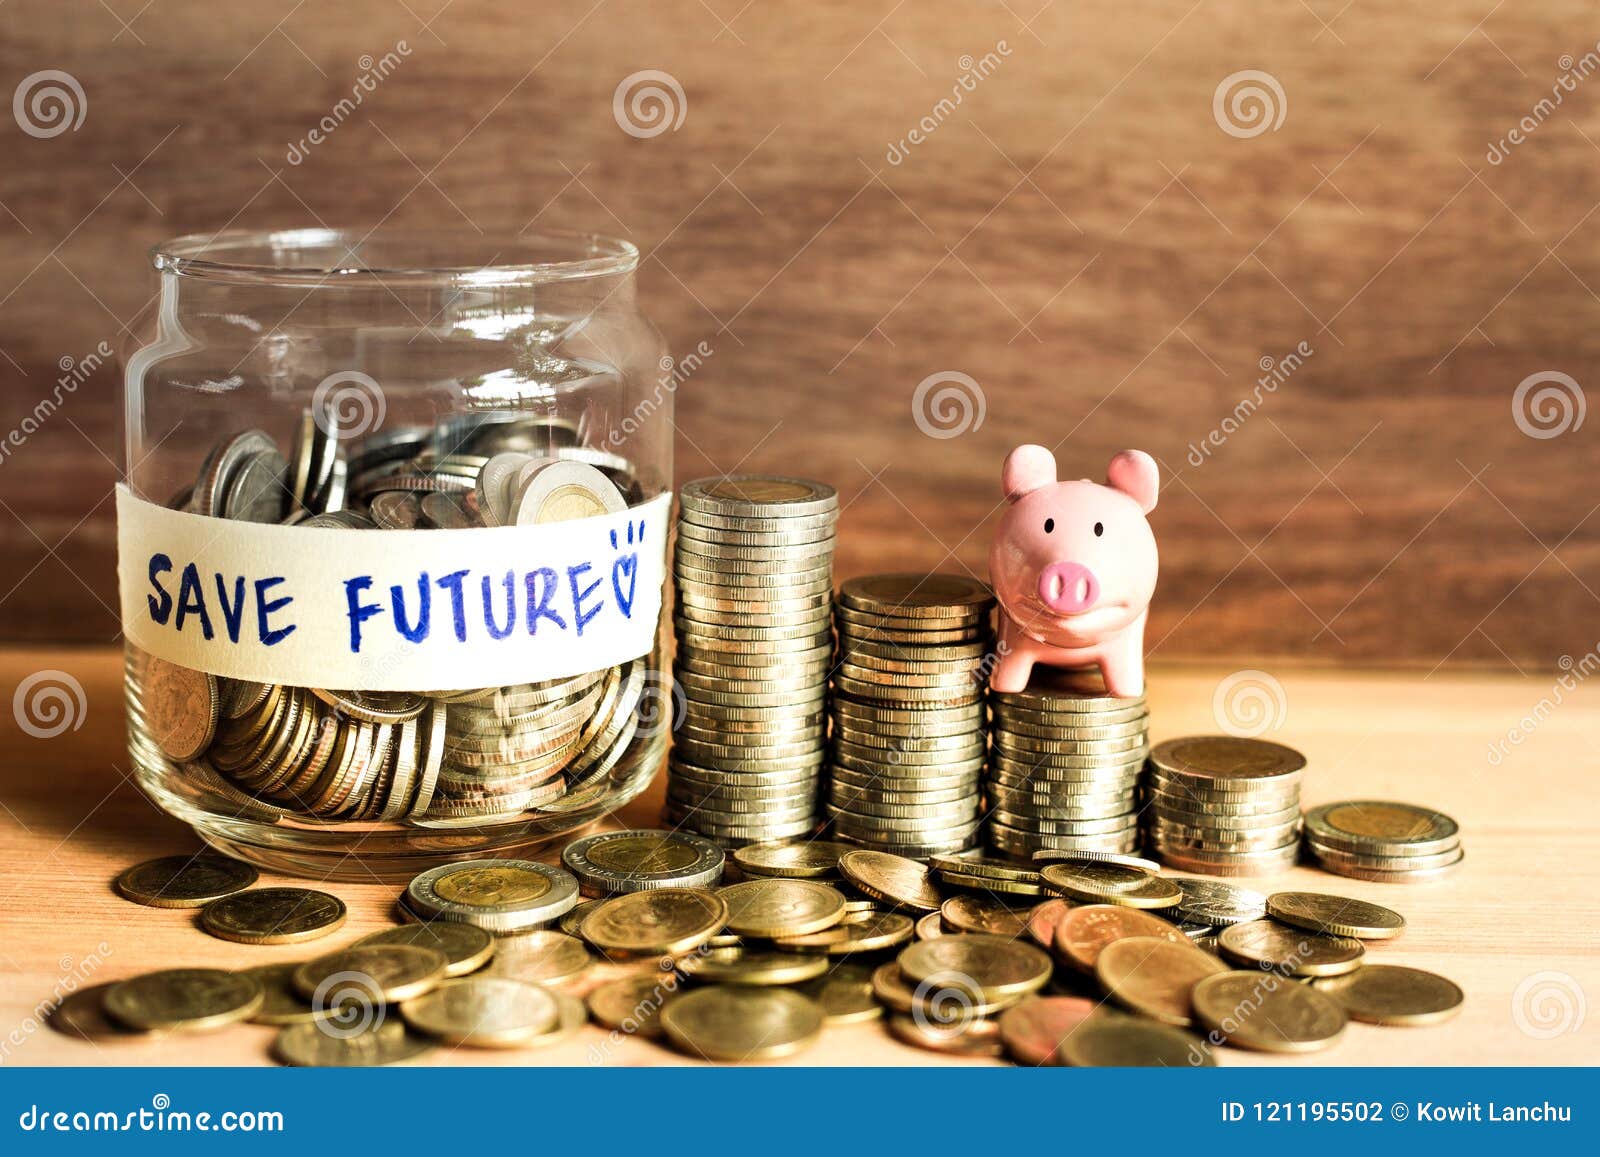 An Ideas of Saving Money for the Future with Coins and Piggy Bank